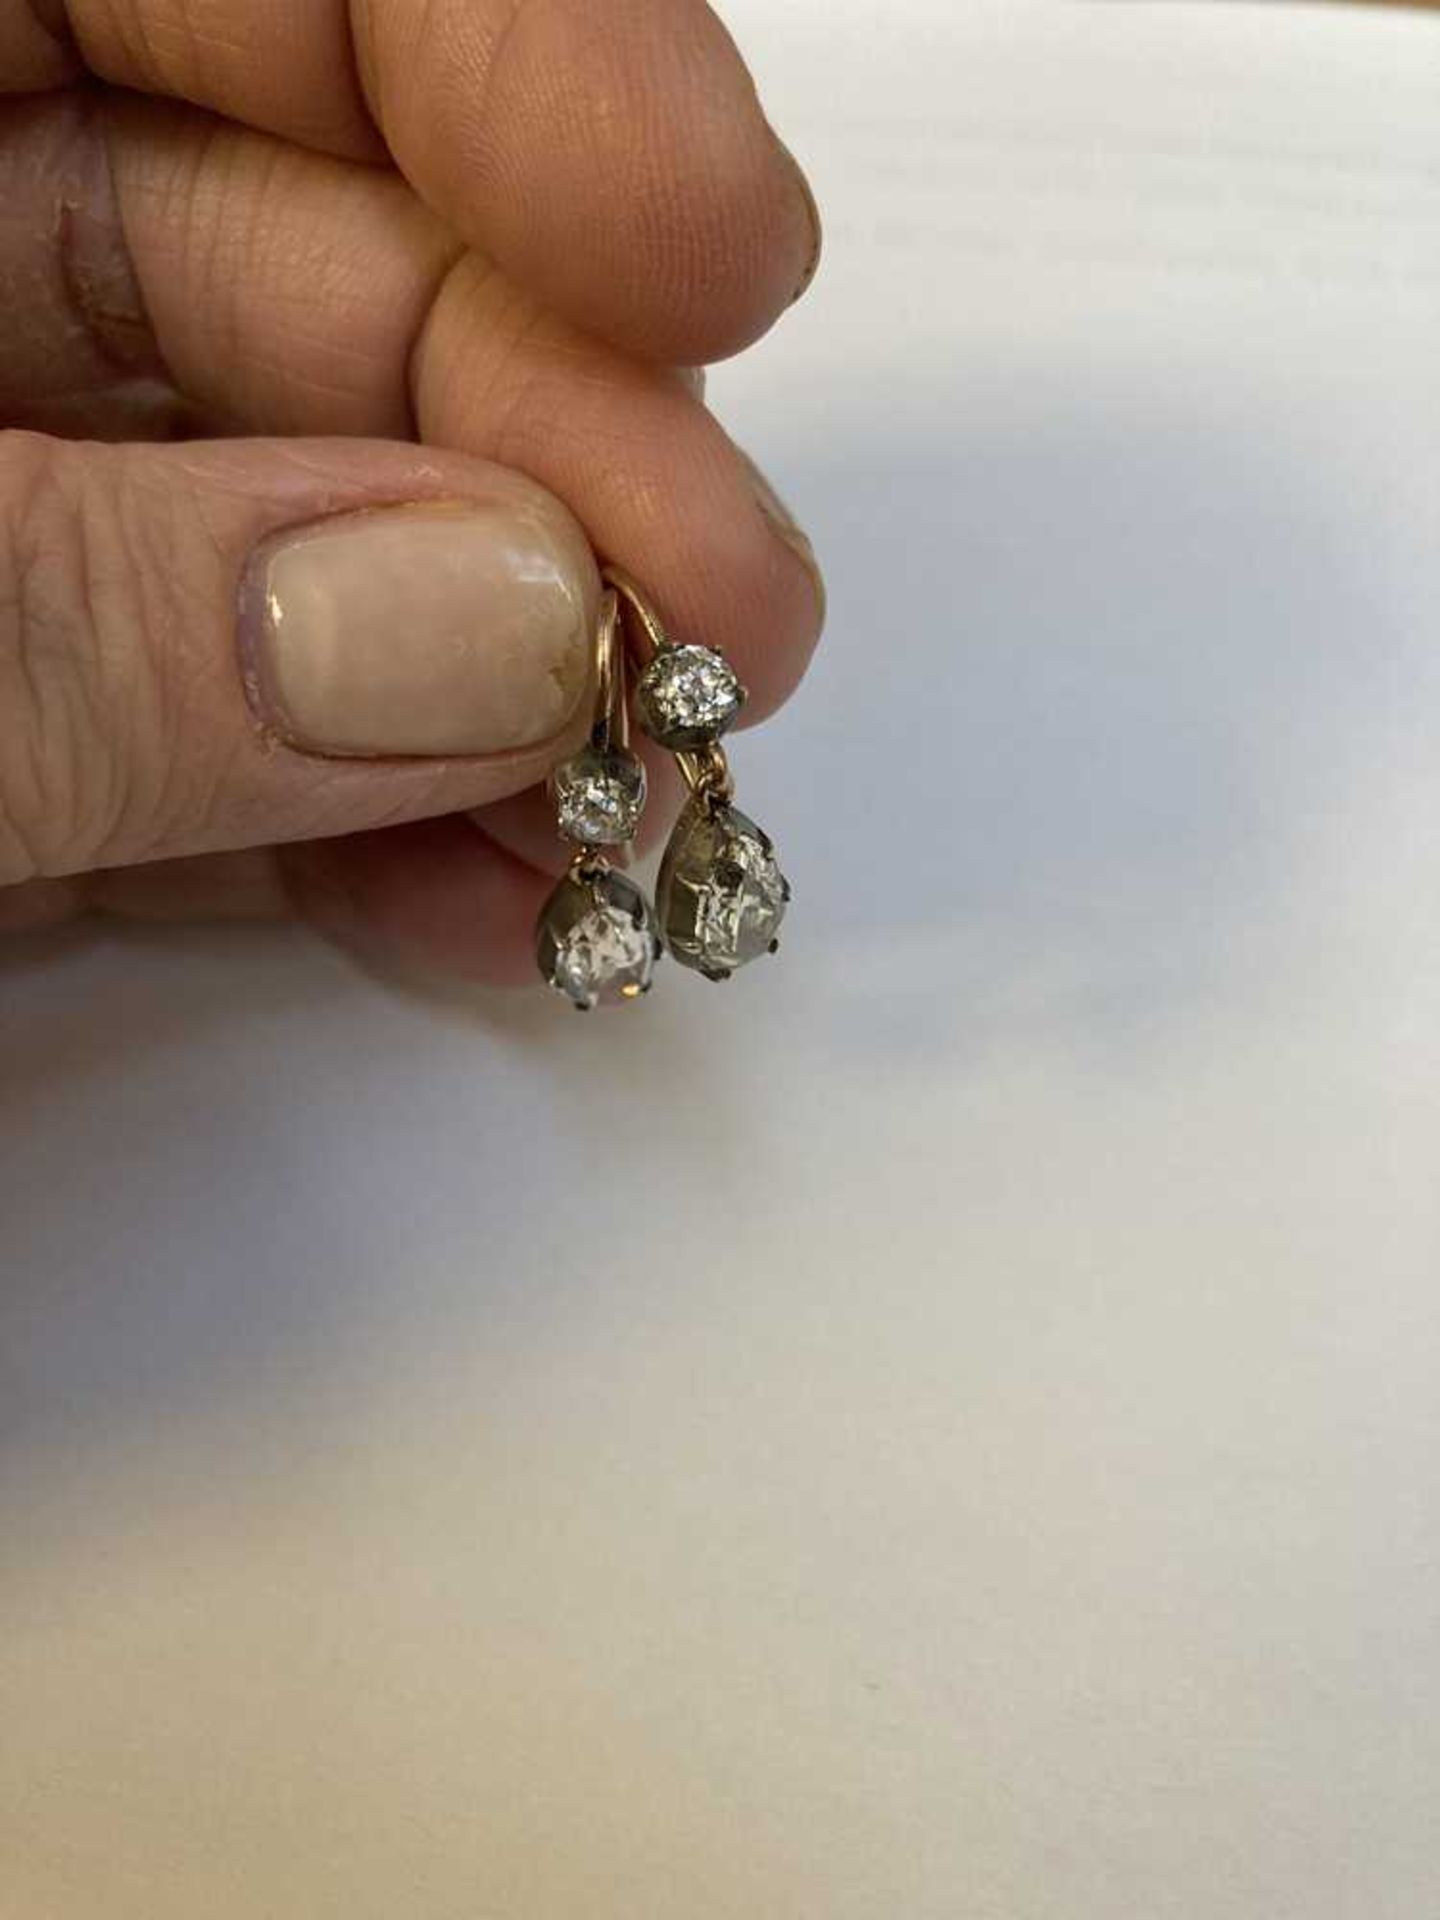 A pair of mid 19th century diamond earrings - Image 3 of 4